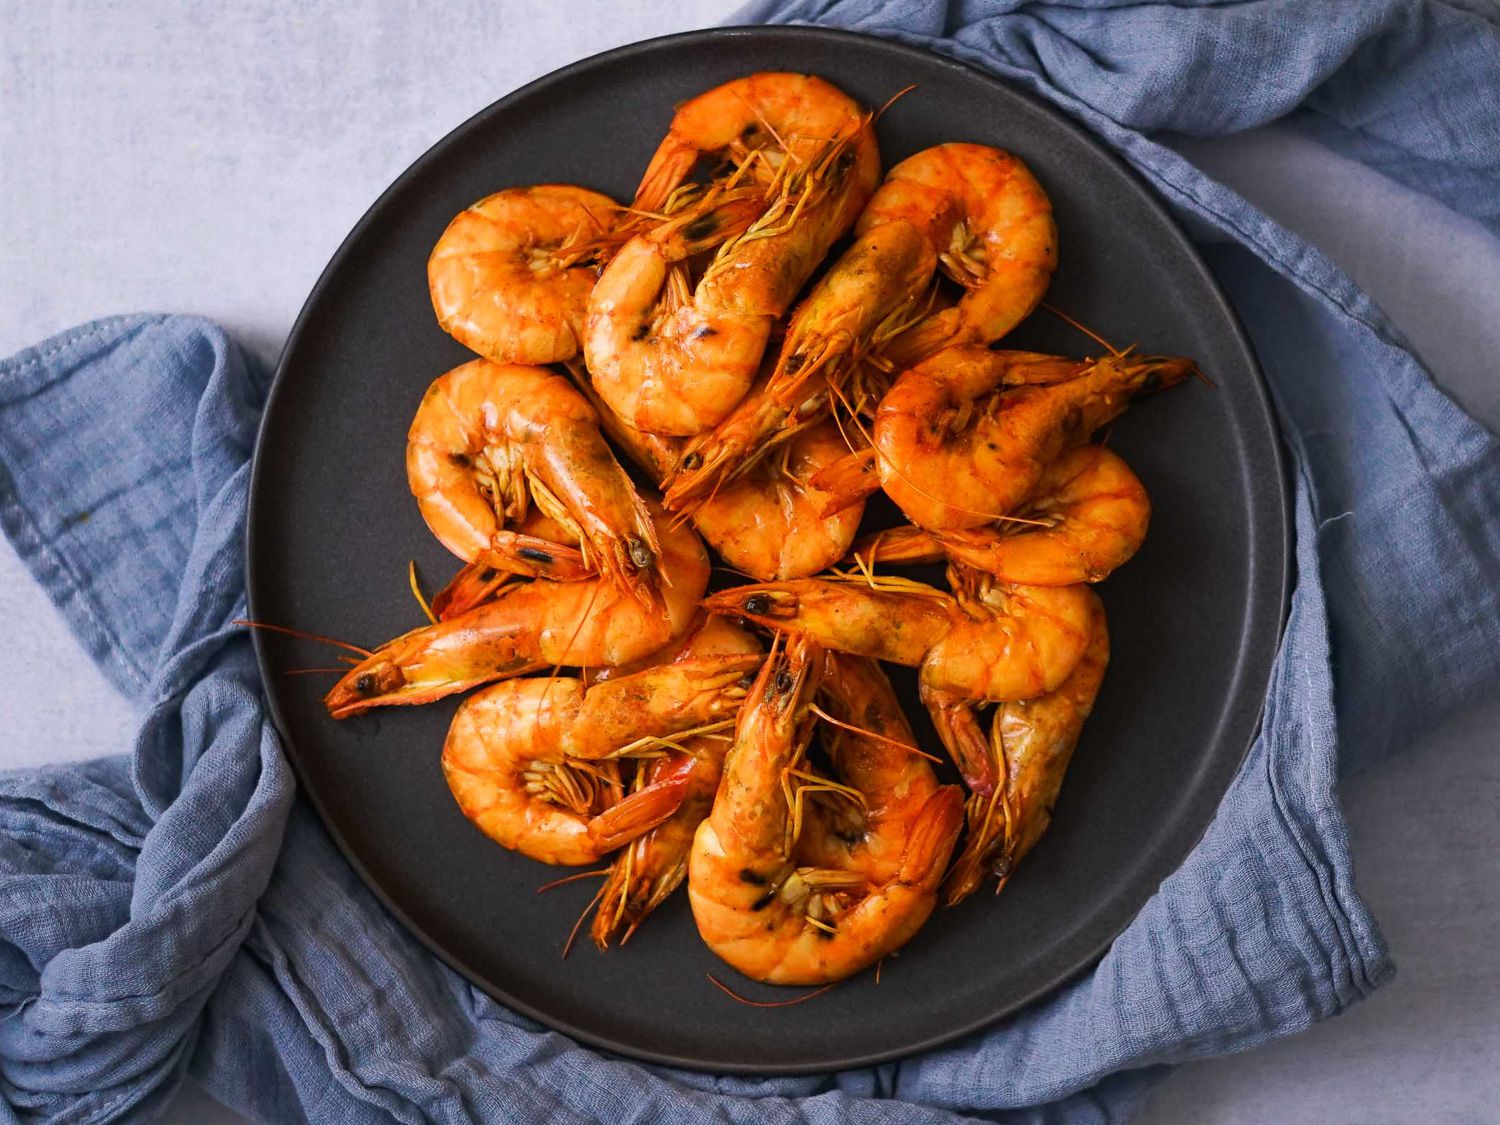 Global Shrimp Market 2022 |  Size (US$ 84.2 Billion by 2027), Price, Demand in World, Top Companies Share, Growth (CAGR of 4.8%) and Research Report